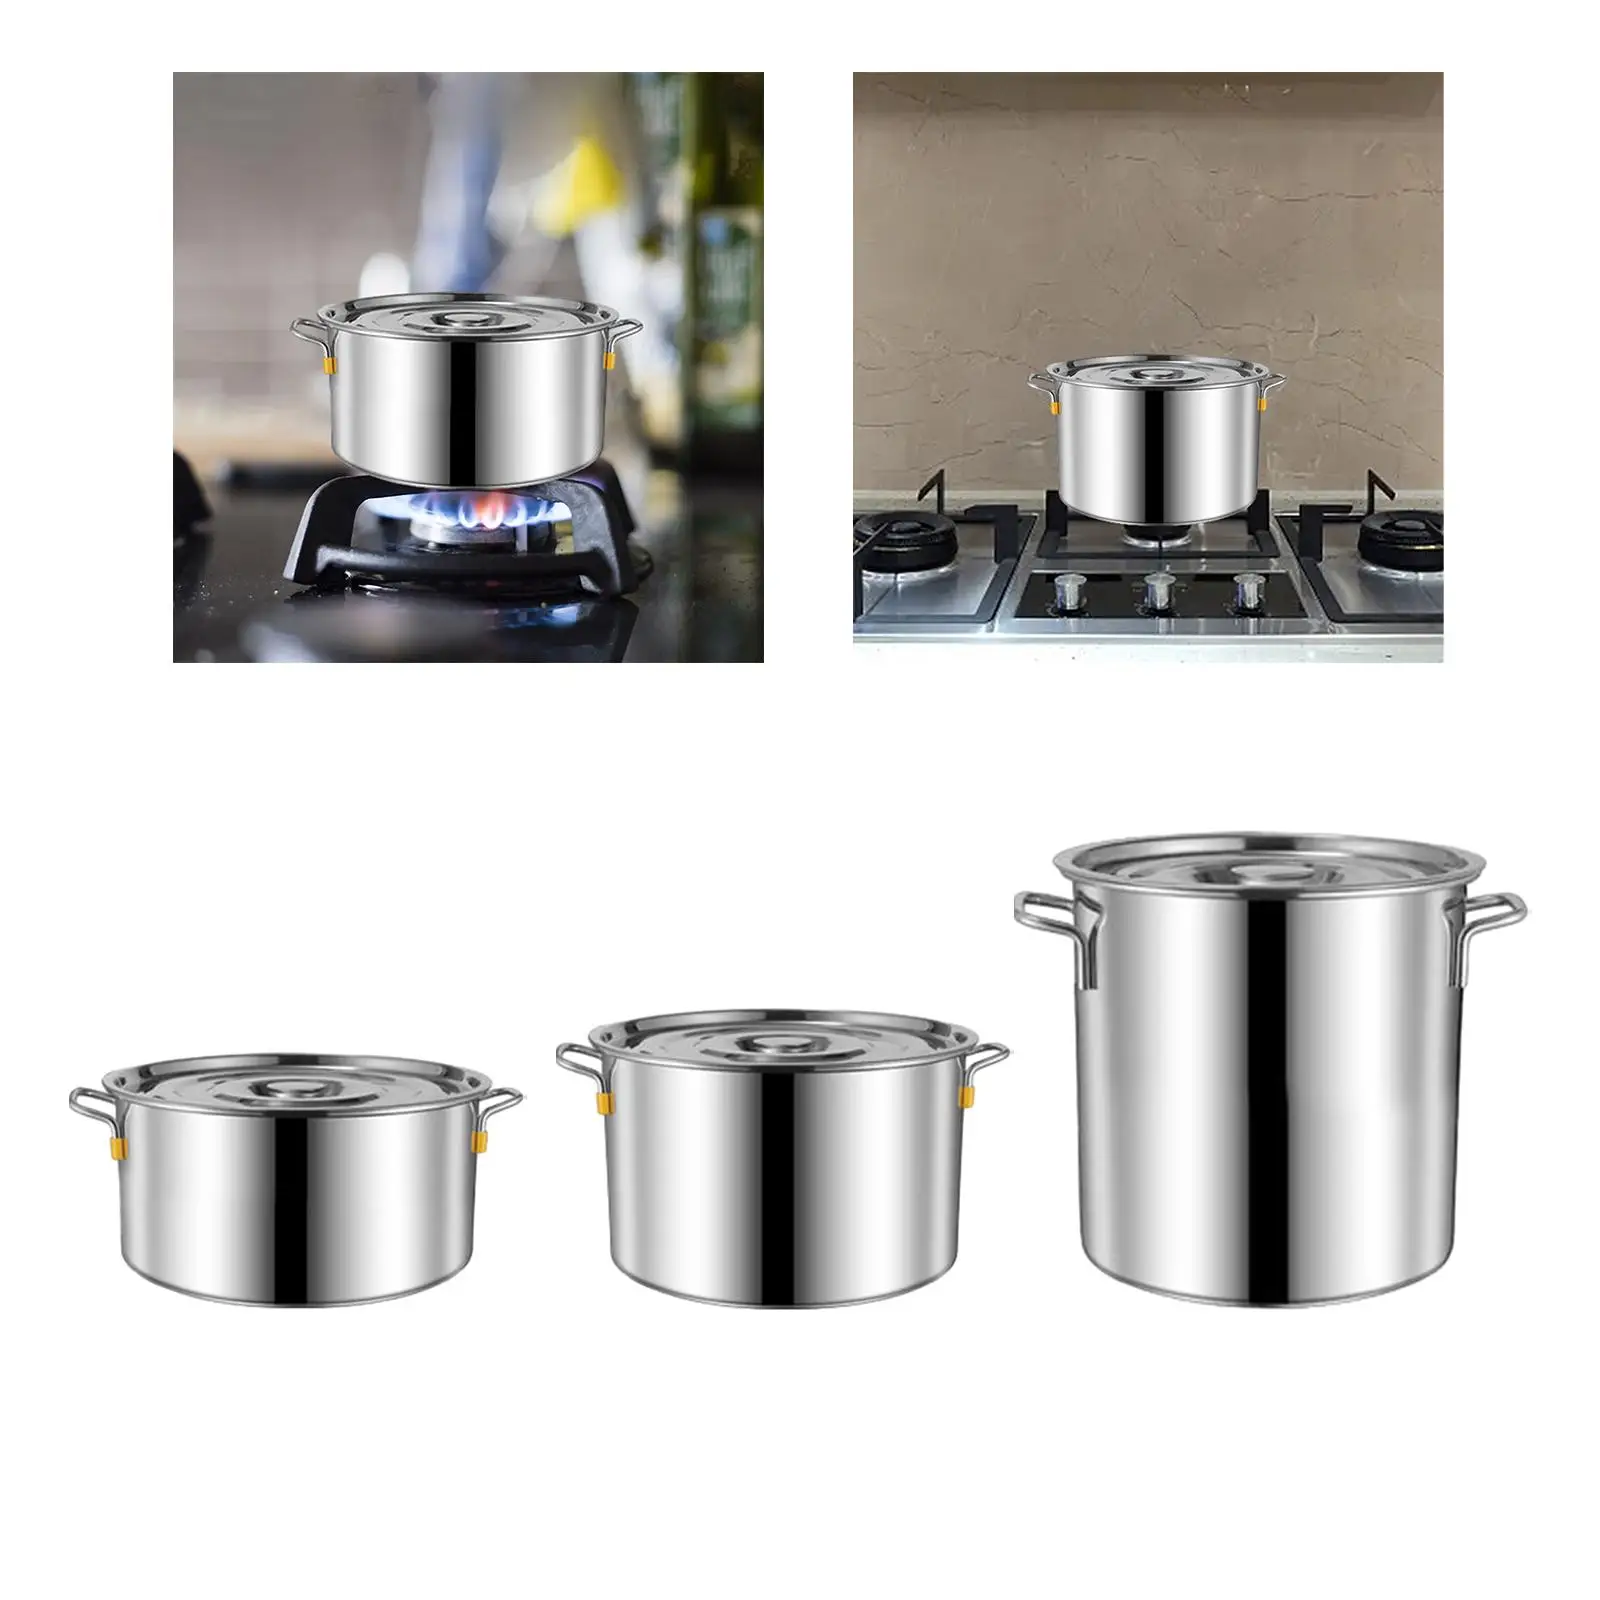 Stainless steel soup pot, composite bottom pot, suitable for all stoves